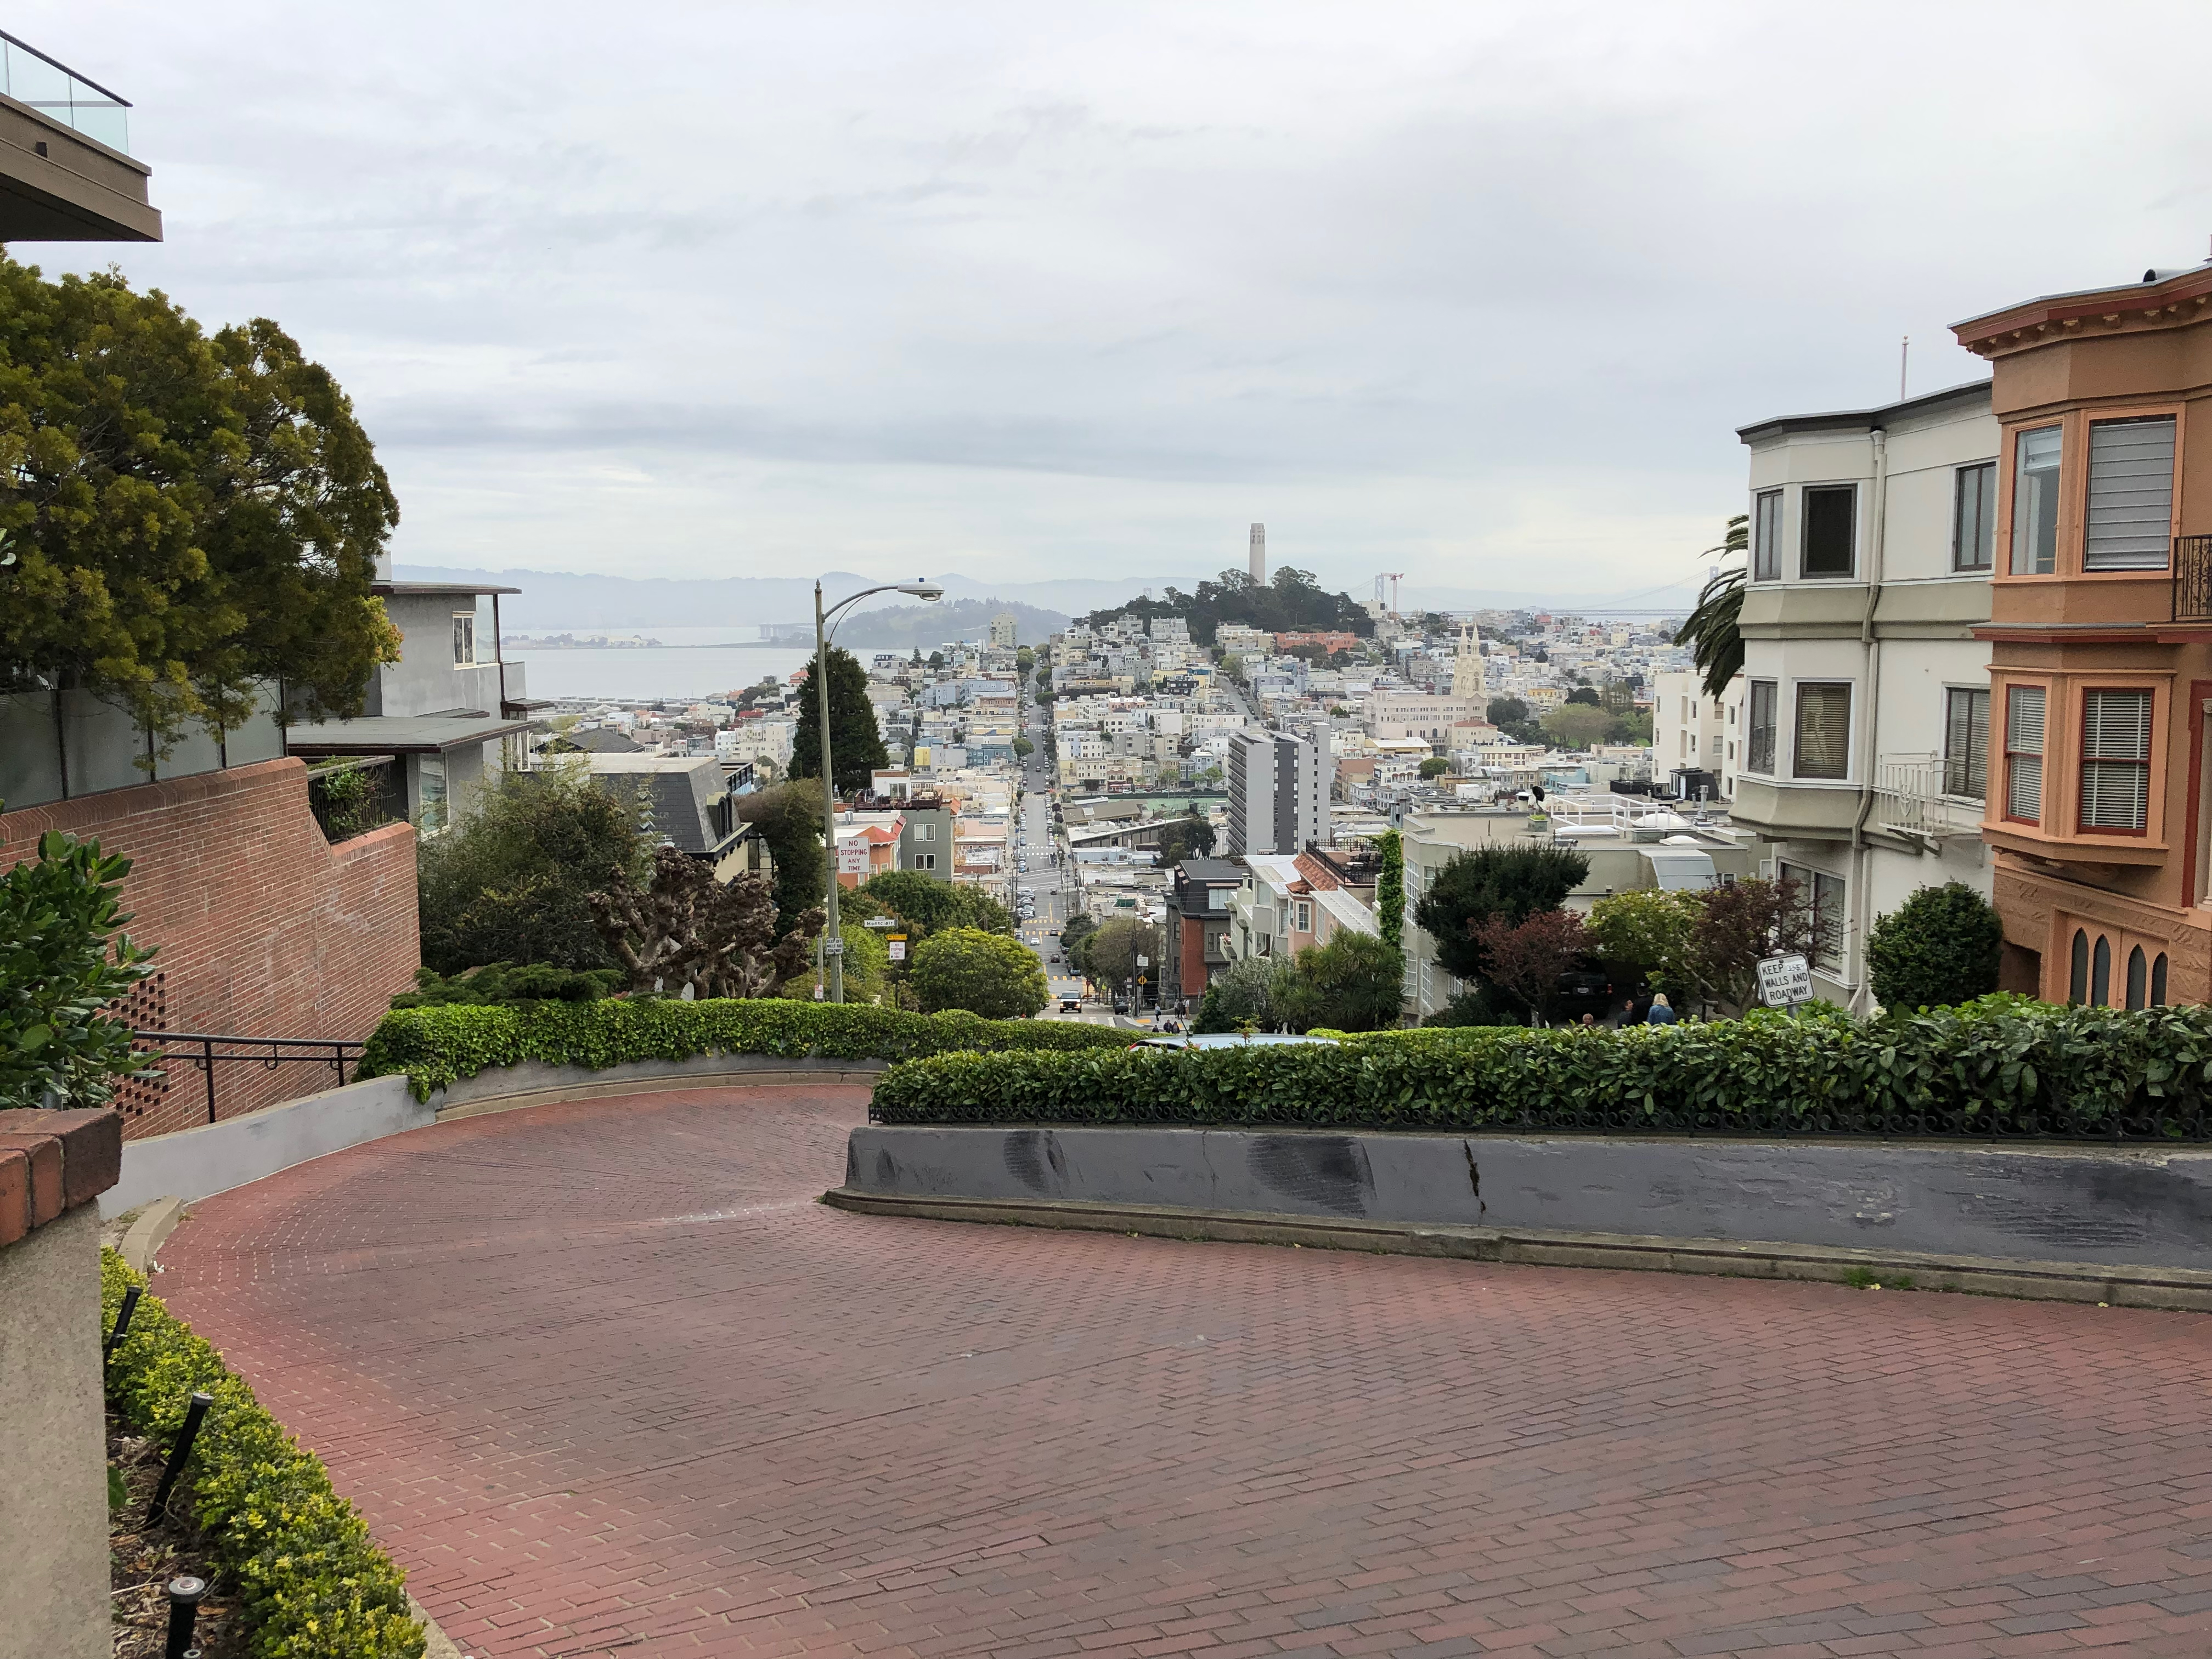 View of Lombard street